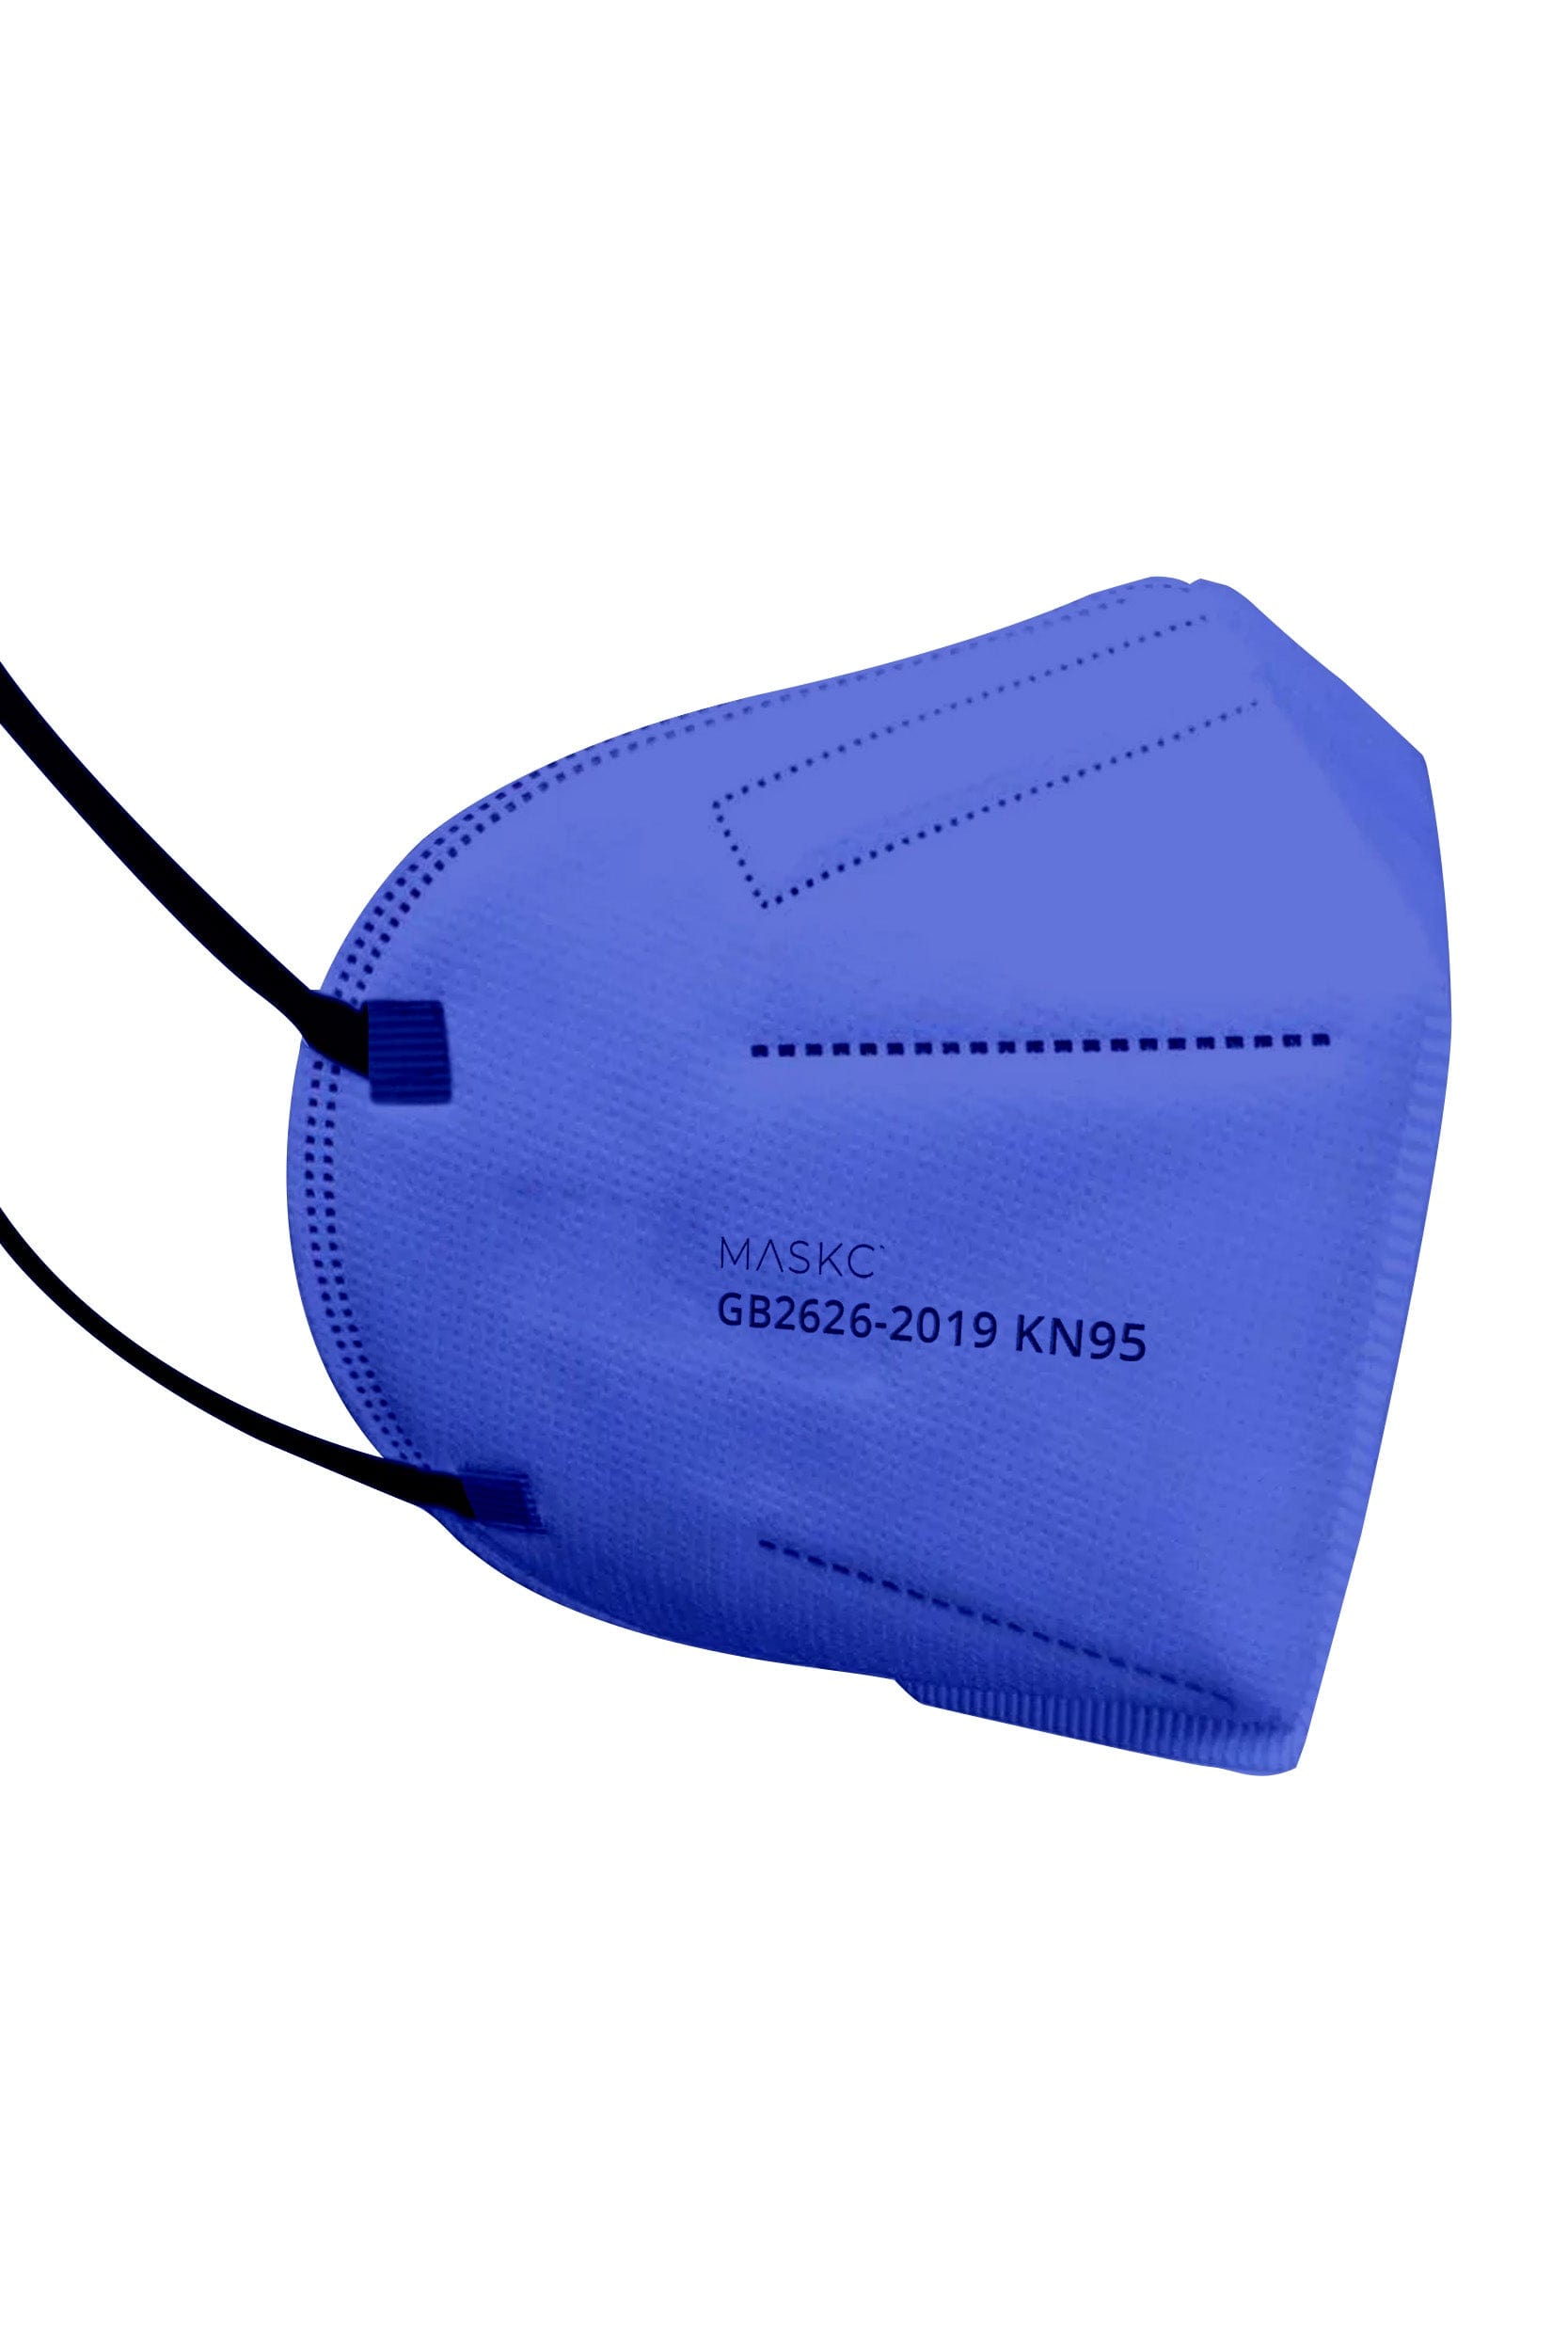 Stylish dark blue KN95 face mask, with soft black ear loops and high quality fabric. 